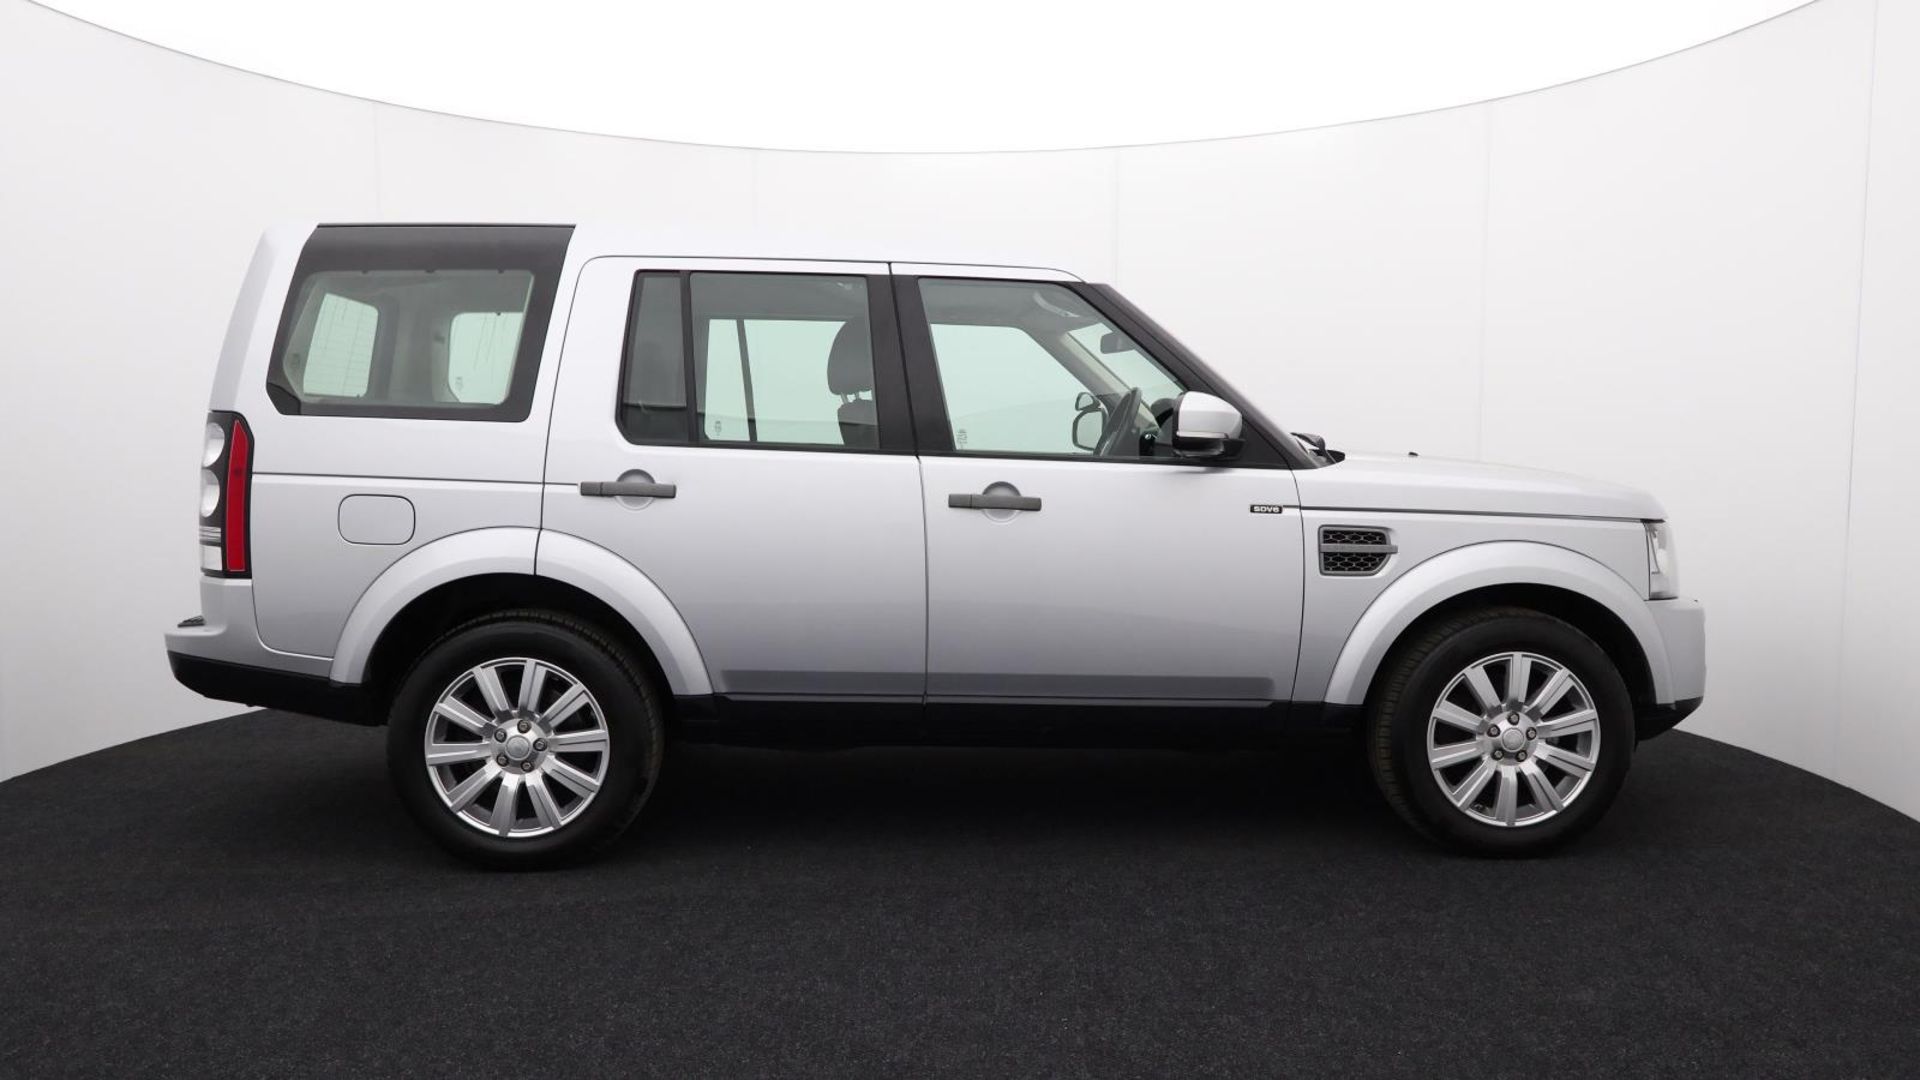 Land Rover Discovery SDV6 SE - 2015 - Automatic - Diesel - 2993cc 6 Cylinder engine - LJ15 LTE - Image 10 of 44